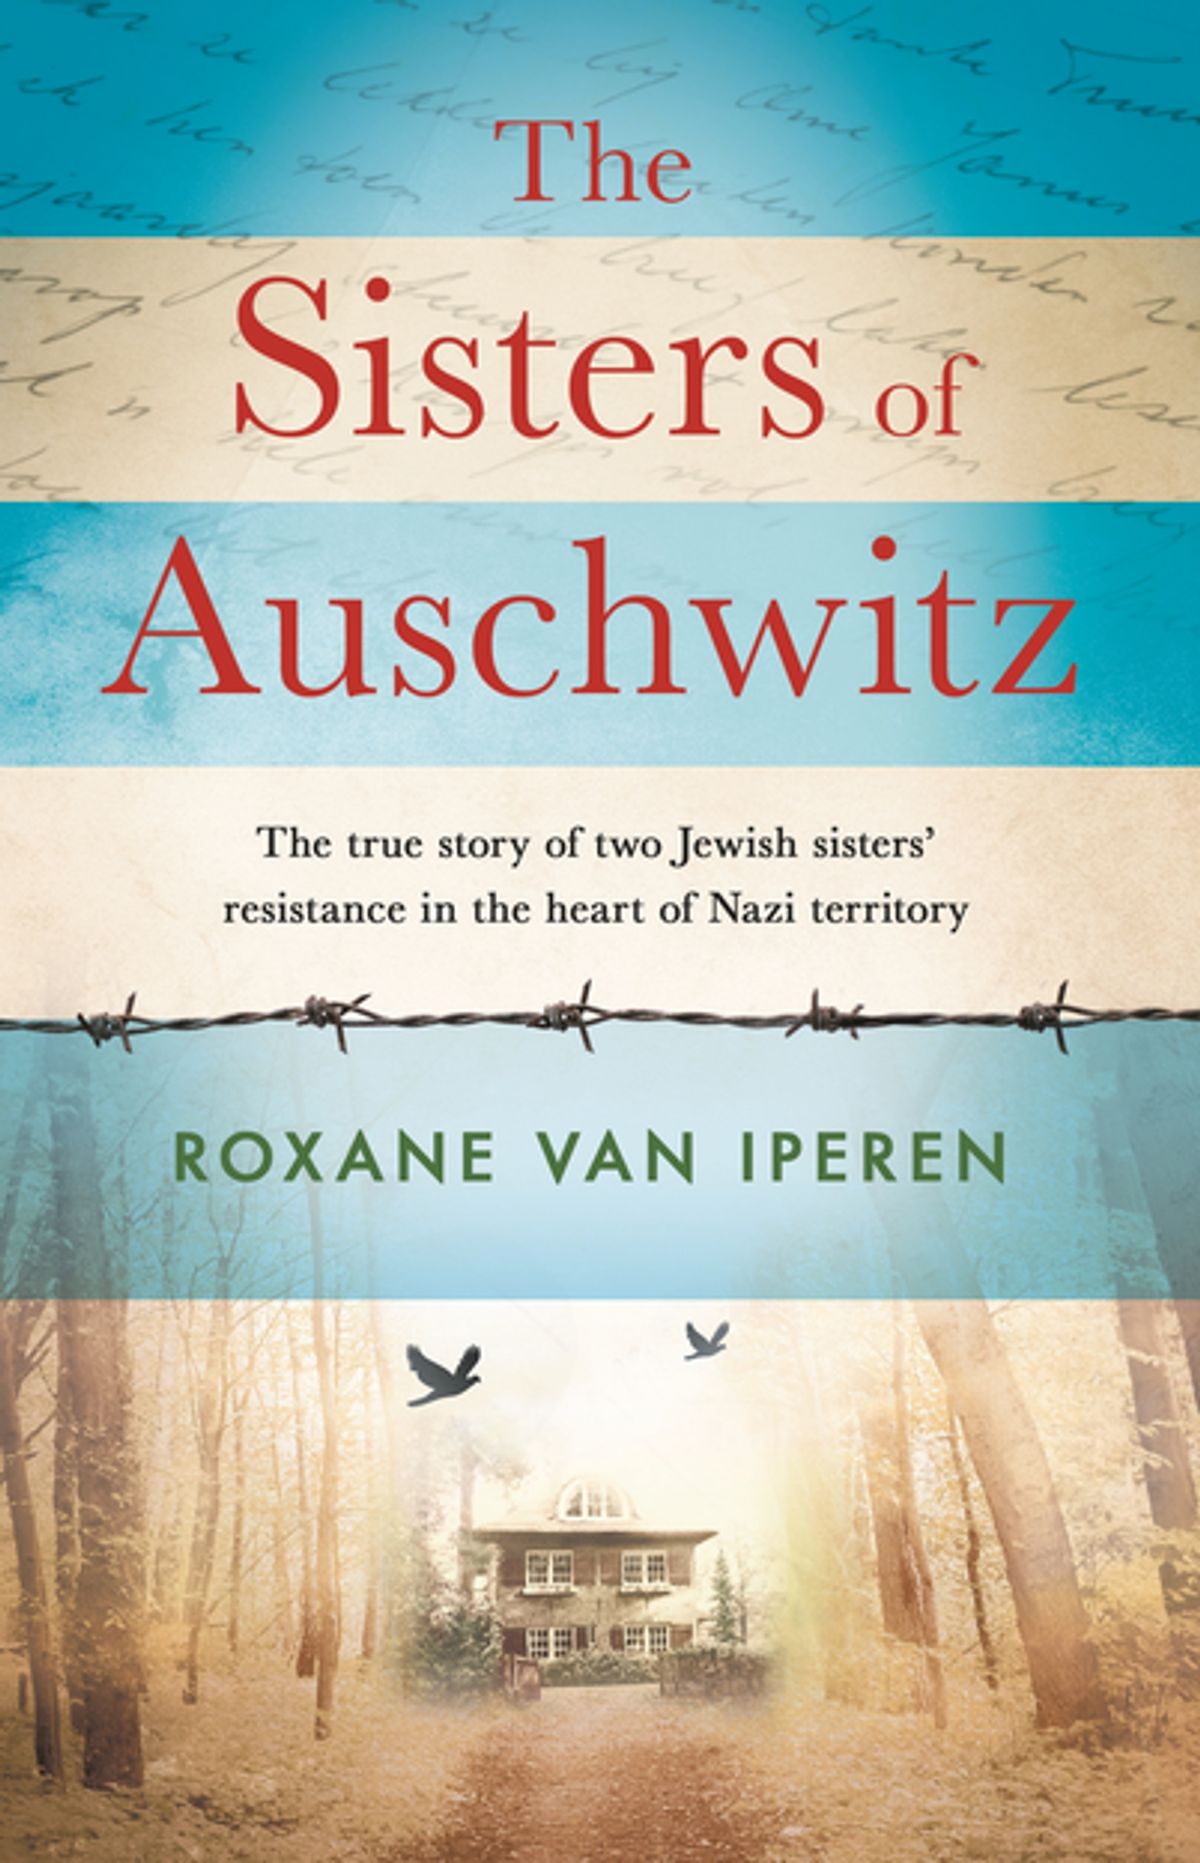 Image for "The Sisters of Auschwitz"